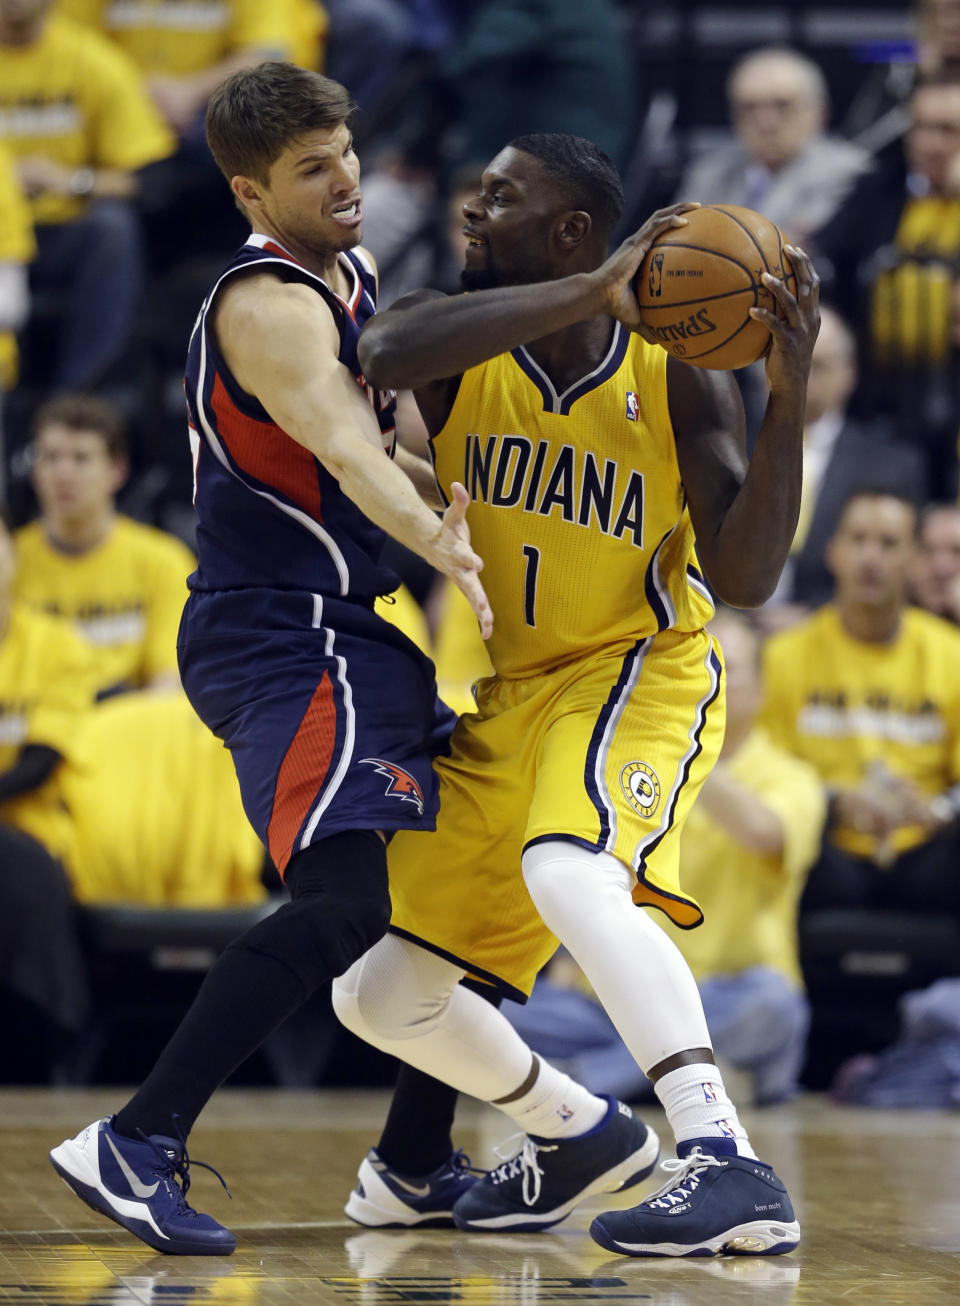 Indiana Pacers' Lance Stephenson (1) is defended by Atlanta Hawks' Kyle Korver during the first half in Game 1 of an opening-round NBA basketball playoff series on Saturday, April 19, 2014, in Indianapolis. (AP Photo/Darron Cummings)